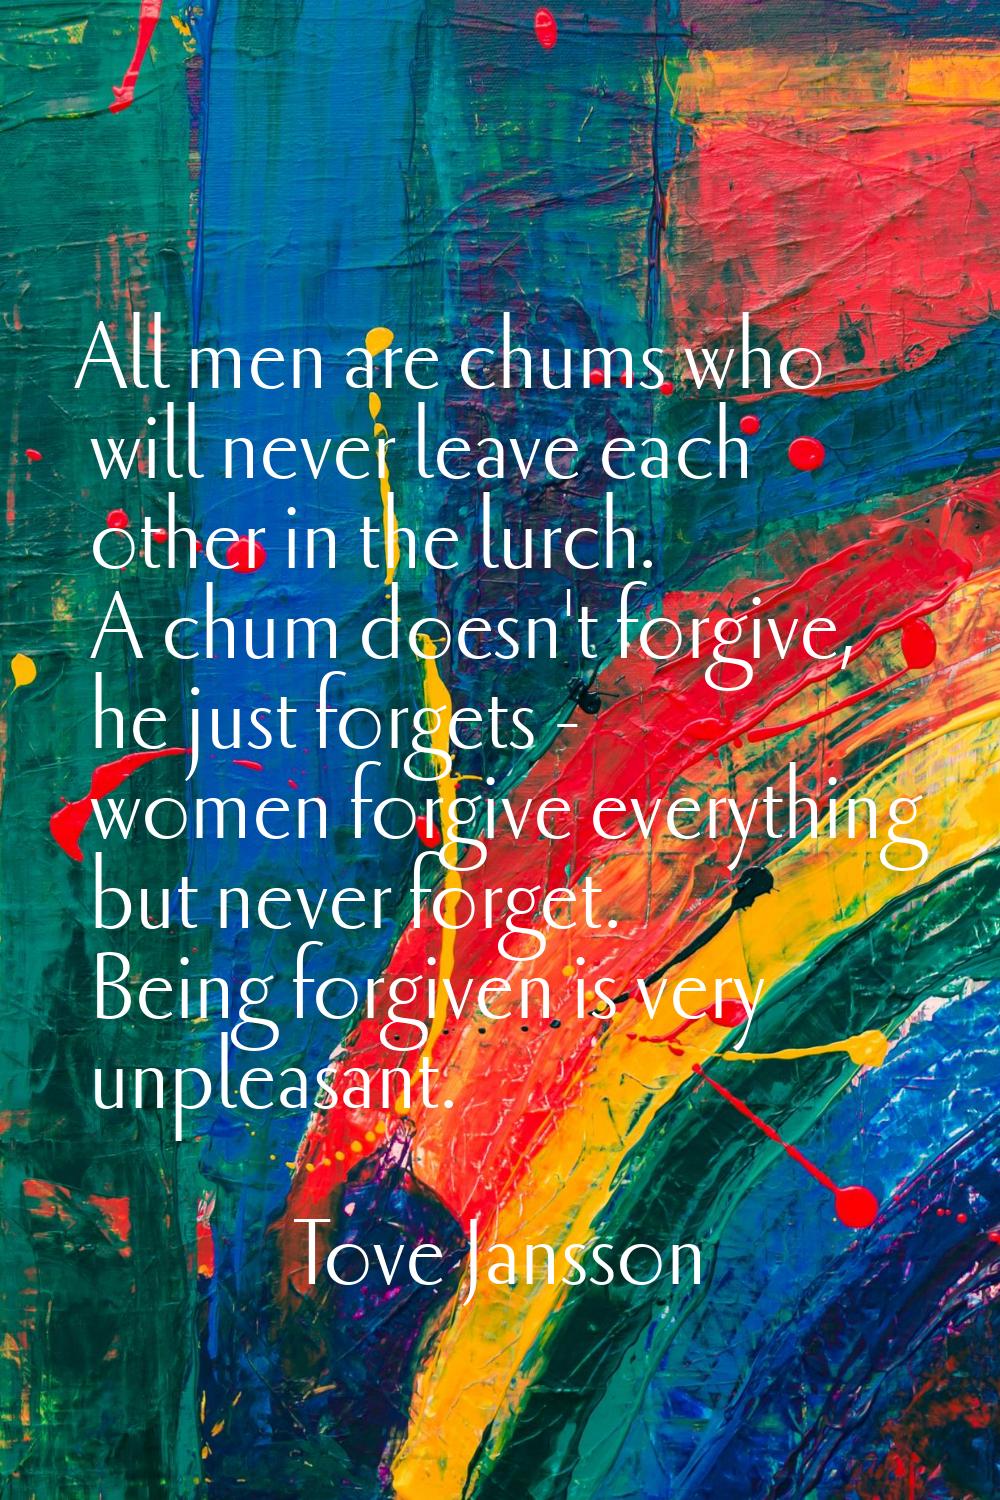 All men are chums who will never leave each other in the lurch. A chum doesn't forgive, he just for